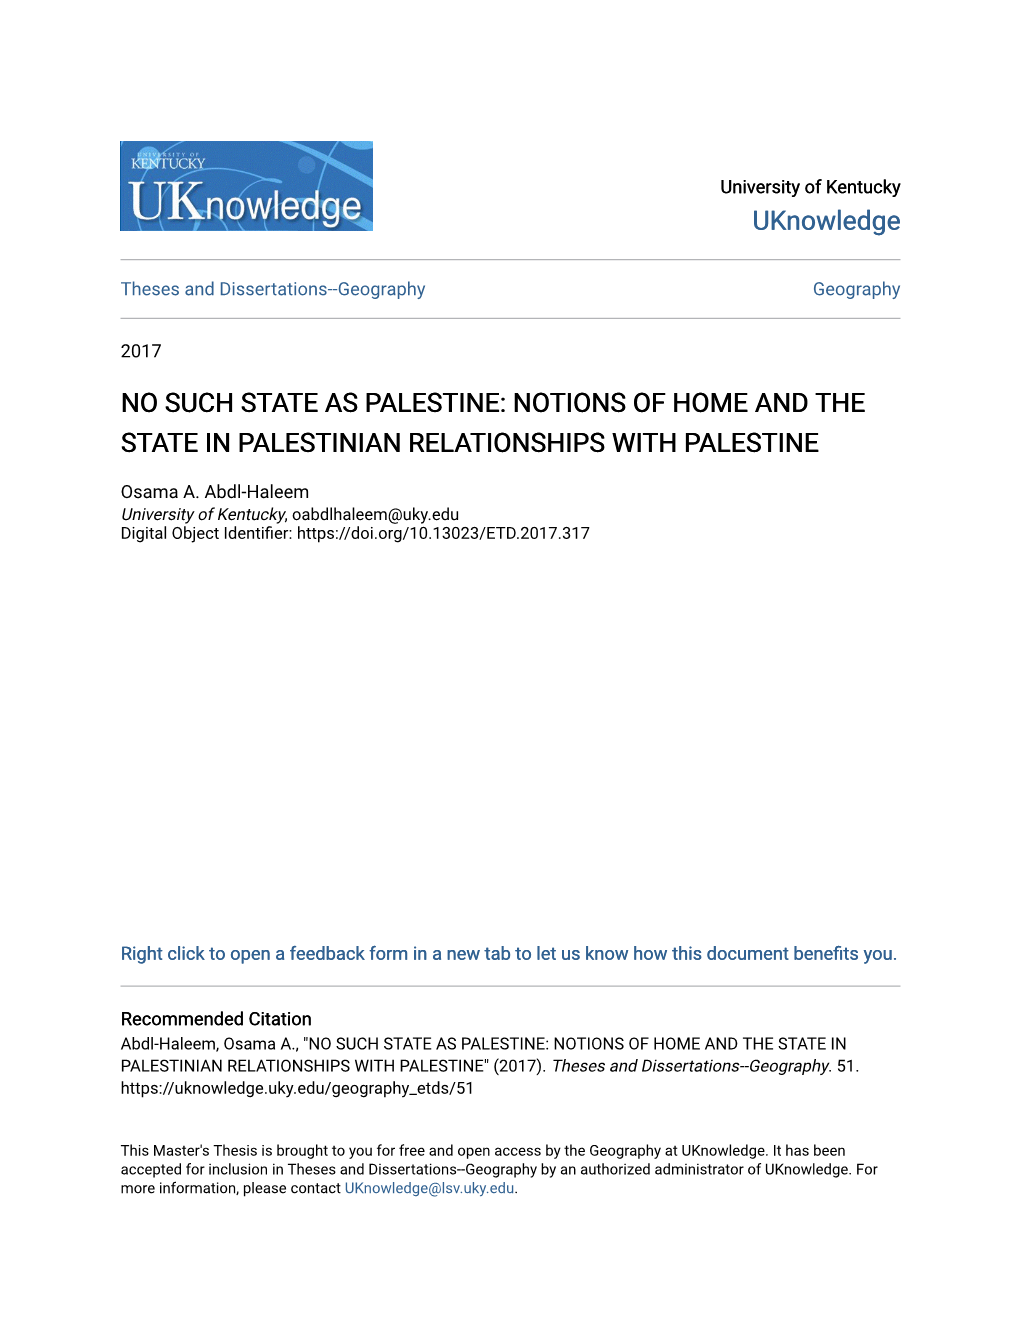 No Such State As Palestine: Notions of Home and the State in Palestinian Relationships with Palestine